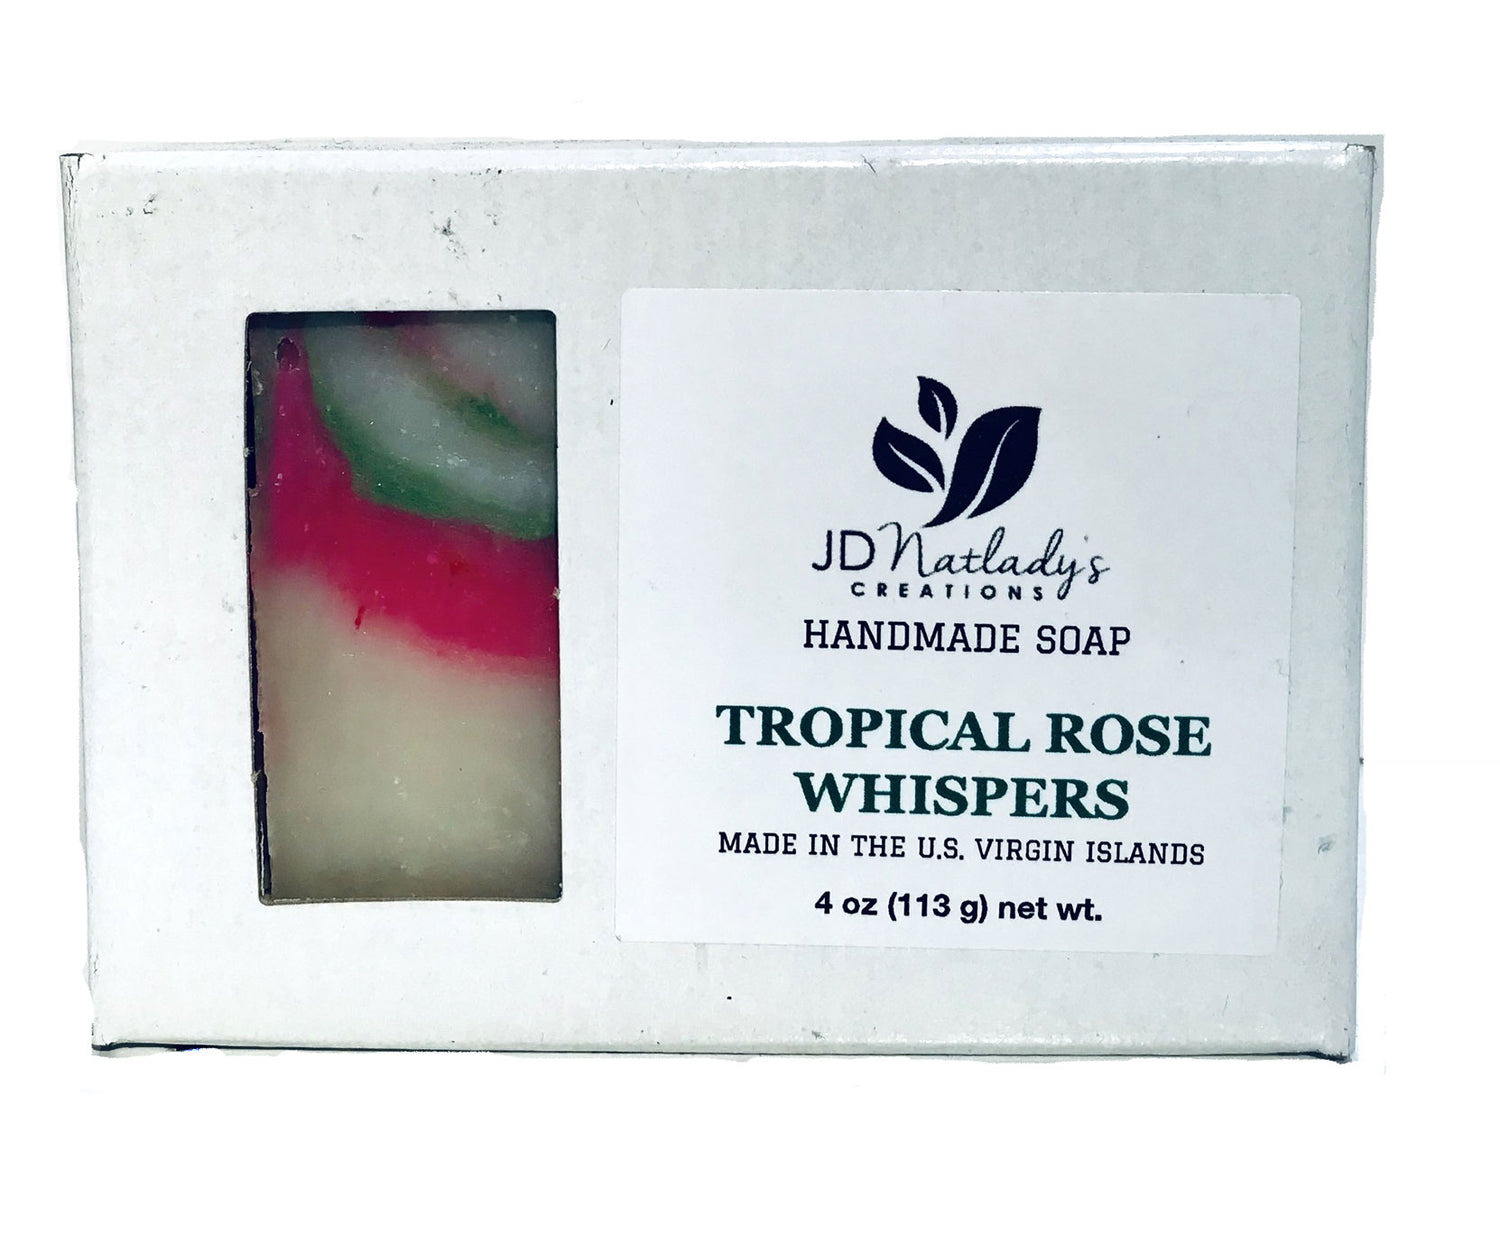 Tropical Rose Whispers Soap by JDNatlady's Creations